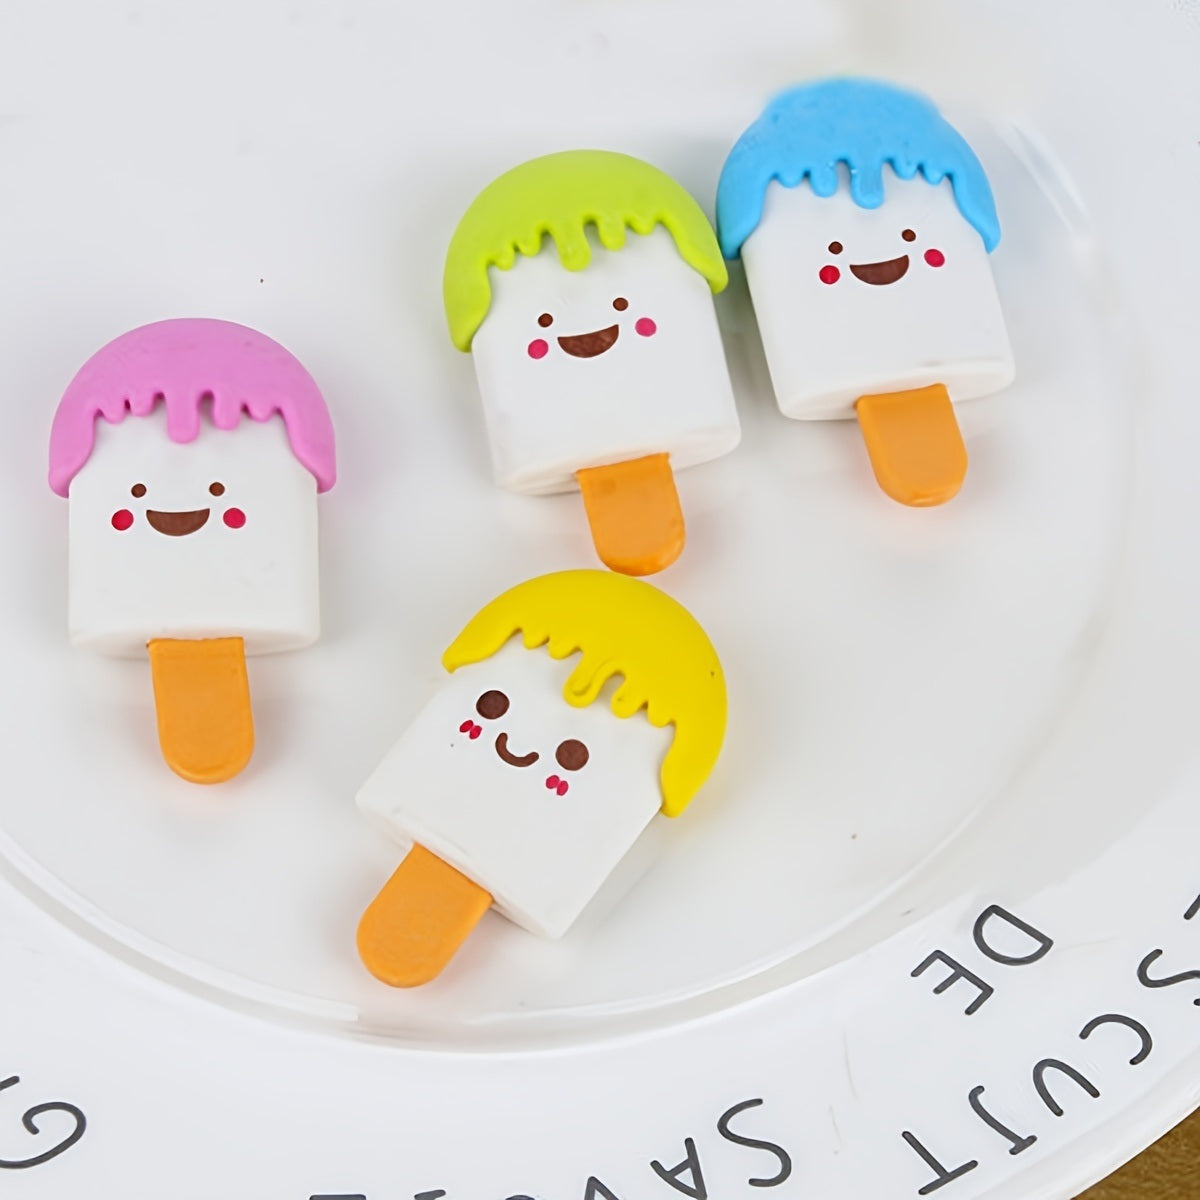 Four colorful 4pcs Ice Cream Shaped Erasers with cartoon faces, displayed on a bench against a backdrop labeled "Chanel.